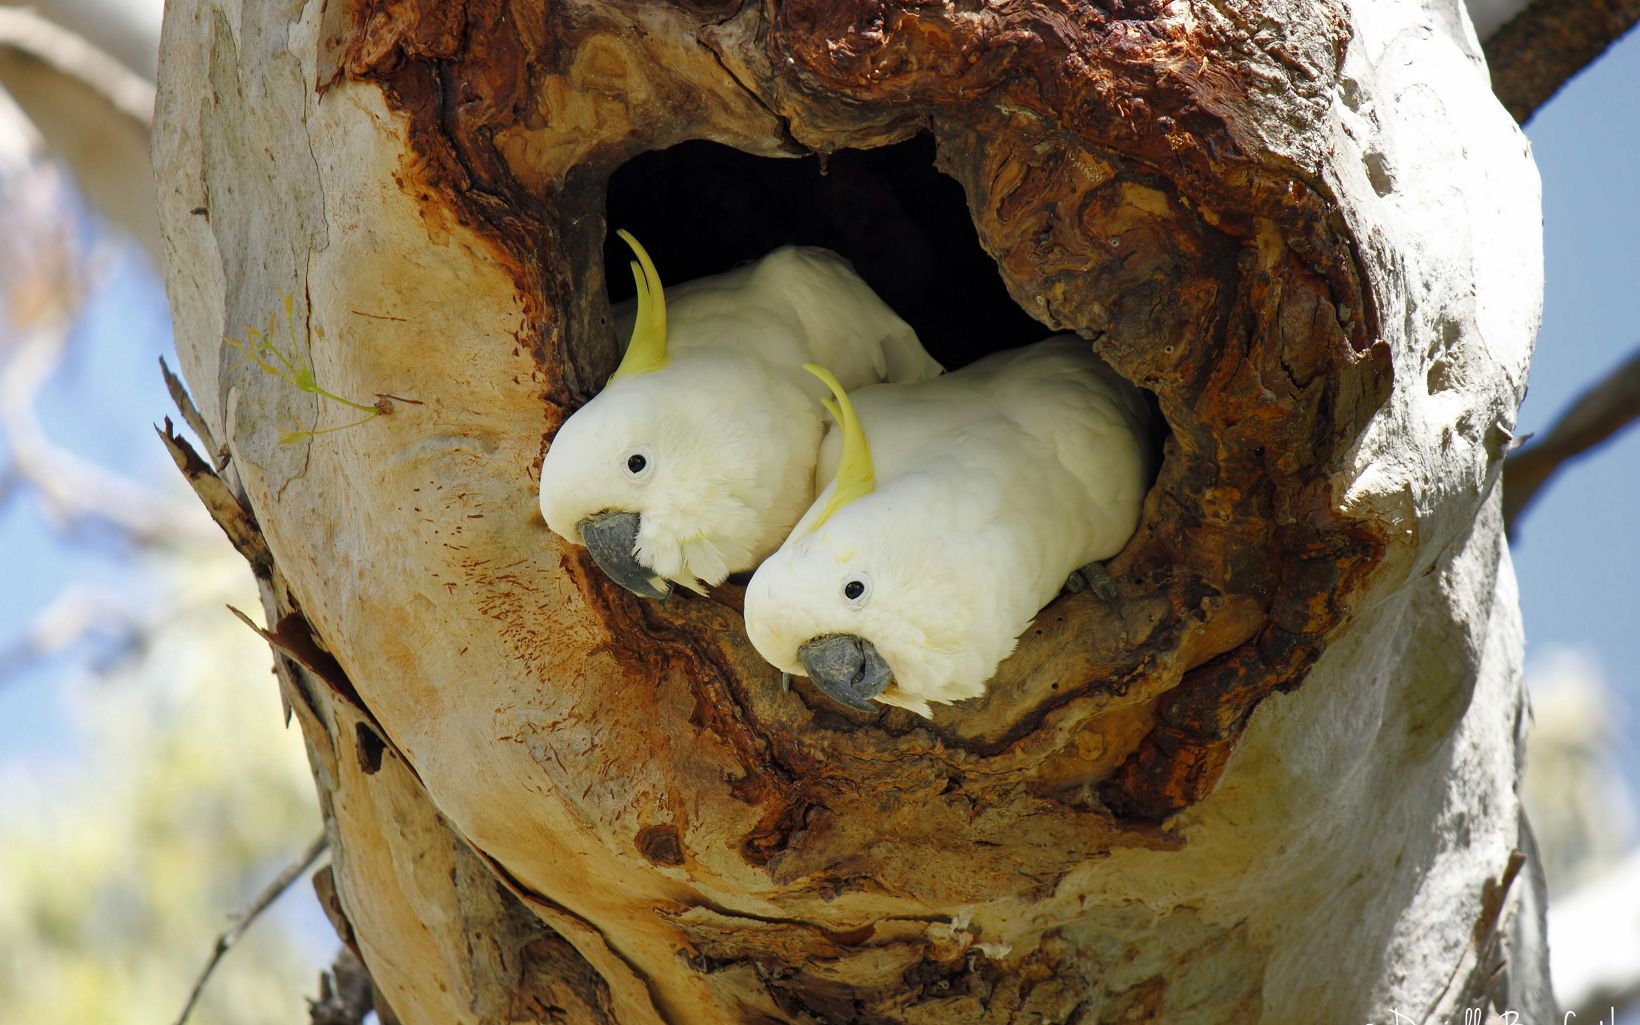 Sulphur-crested Cockatoos, two white birds with small yellow crest, in tree hollow